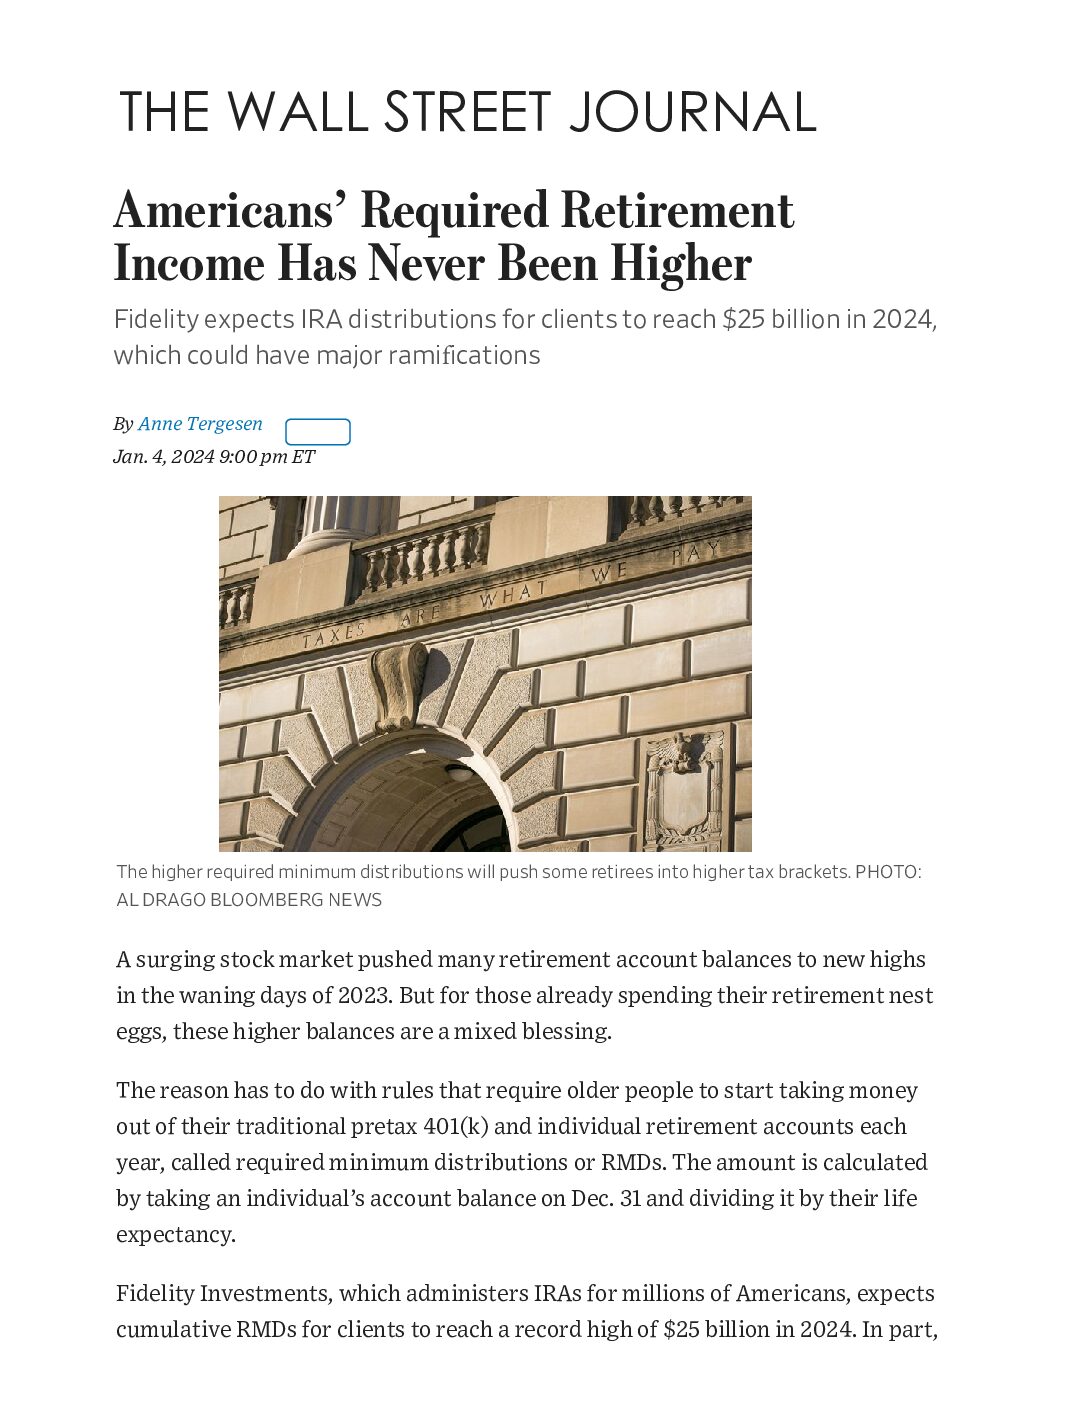 Wall Street Journal – Americans’ Required Retirement Income Has Never Been Higher